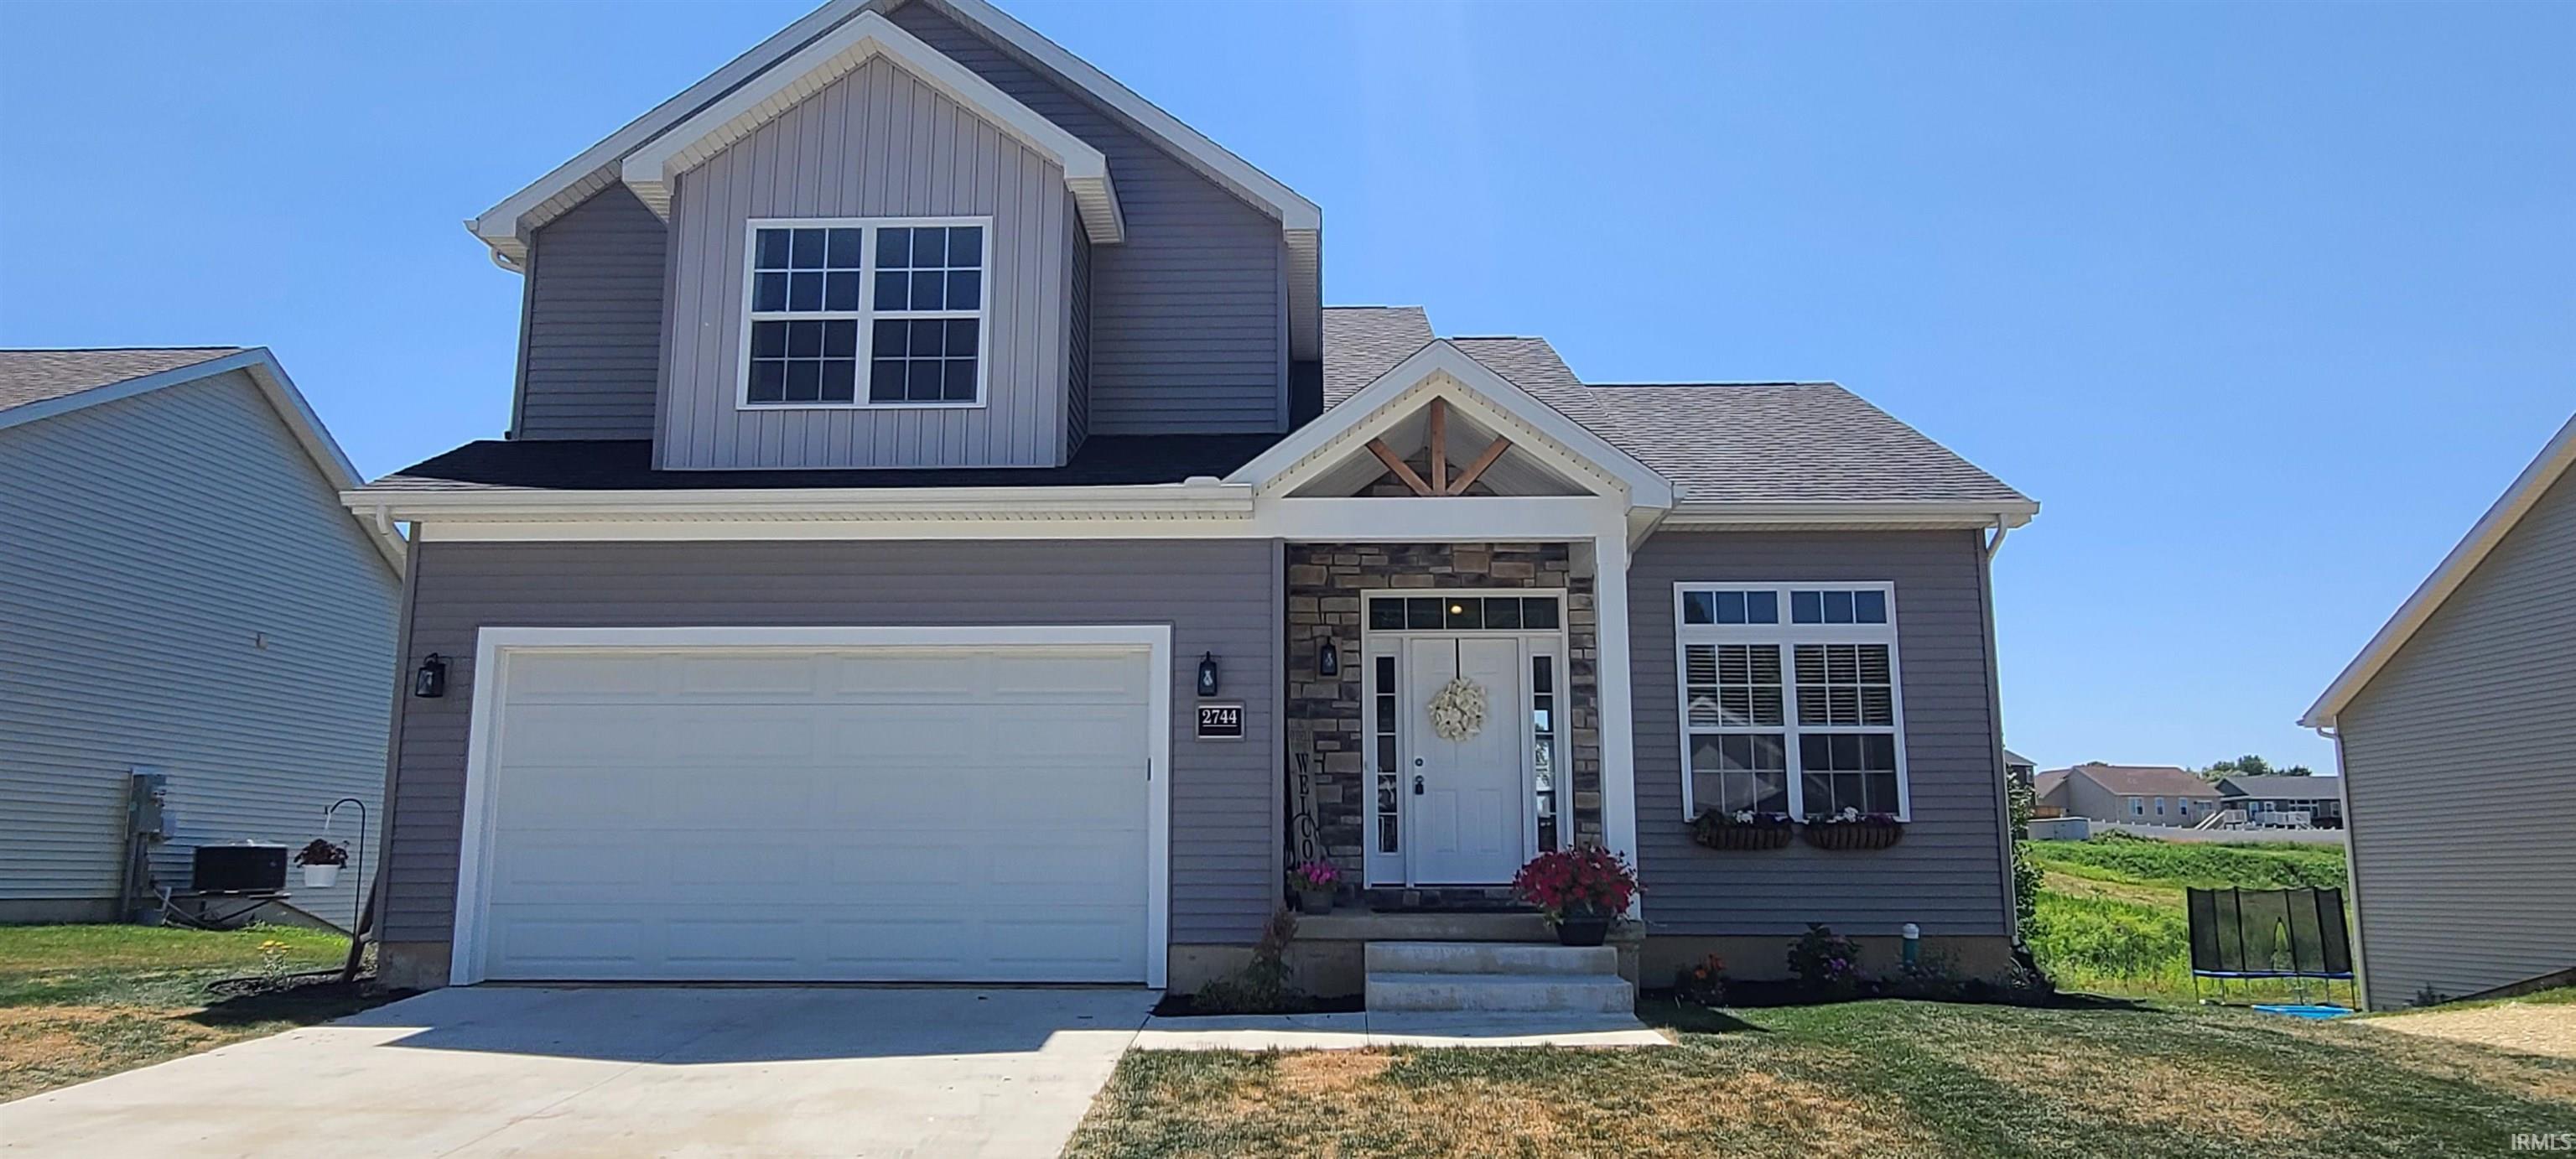 2744 Pine Cone Lane, Warsaw, IN 46582